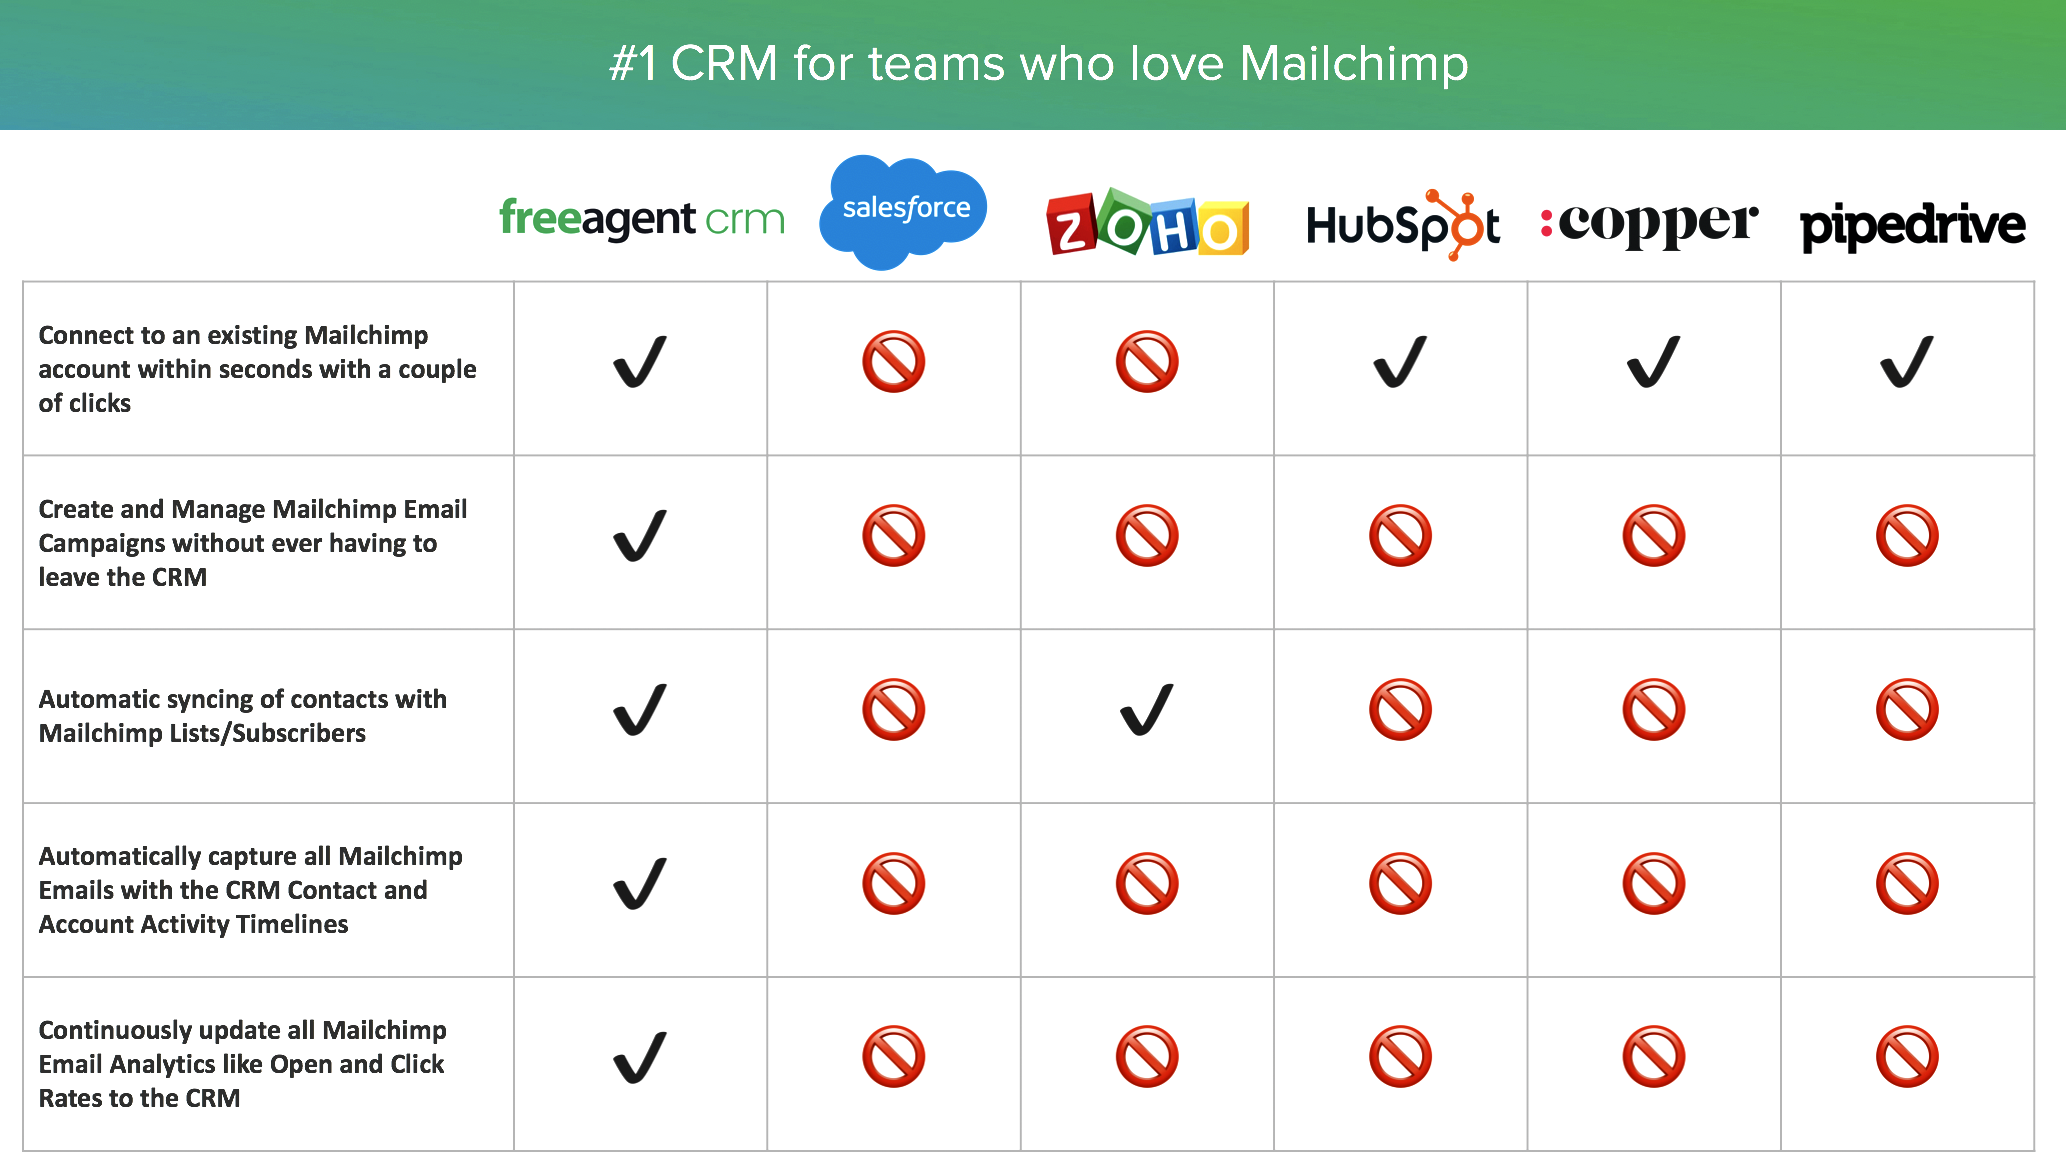 #1 CRM for small business teams who love Mailchimp